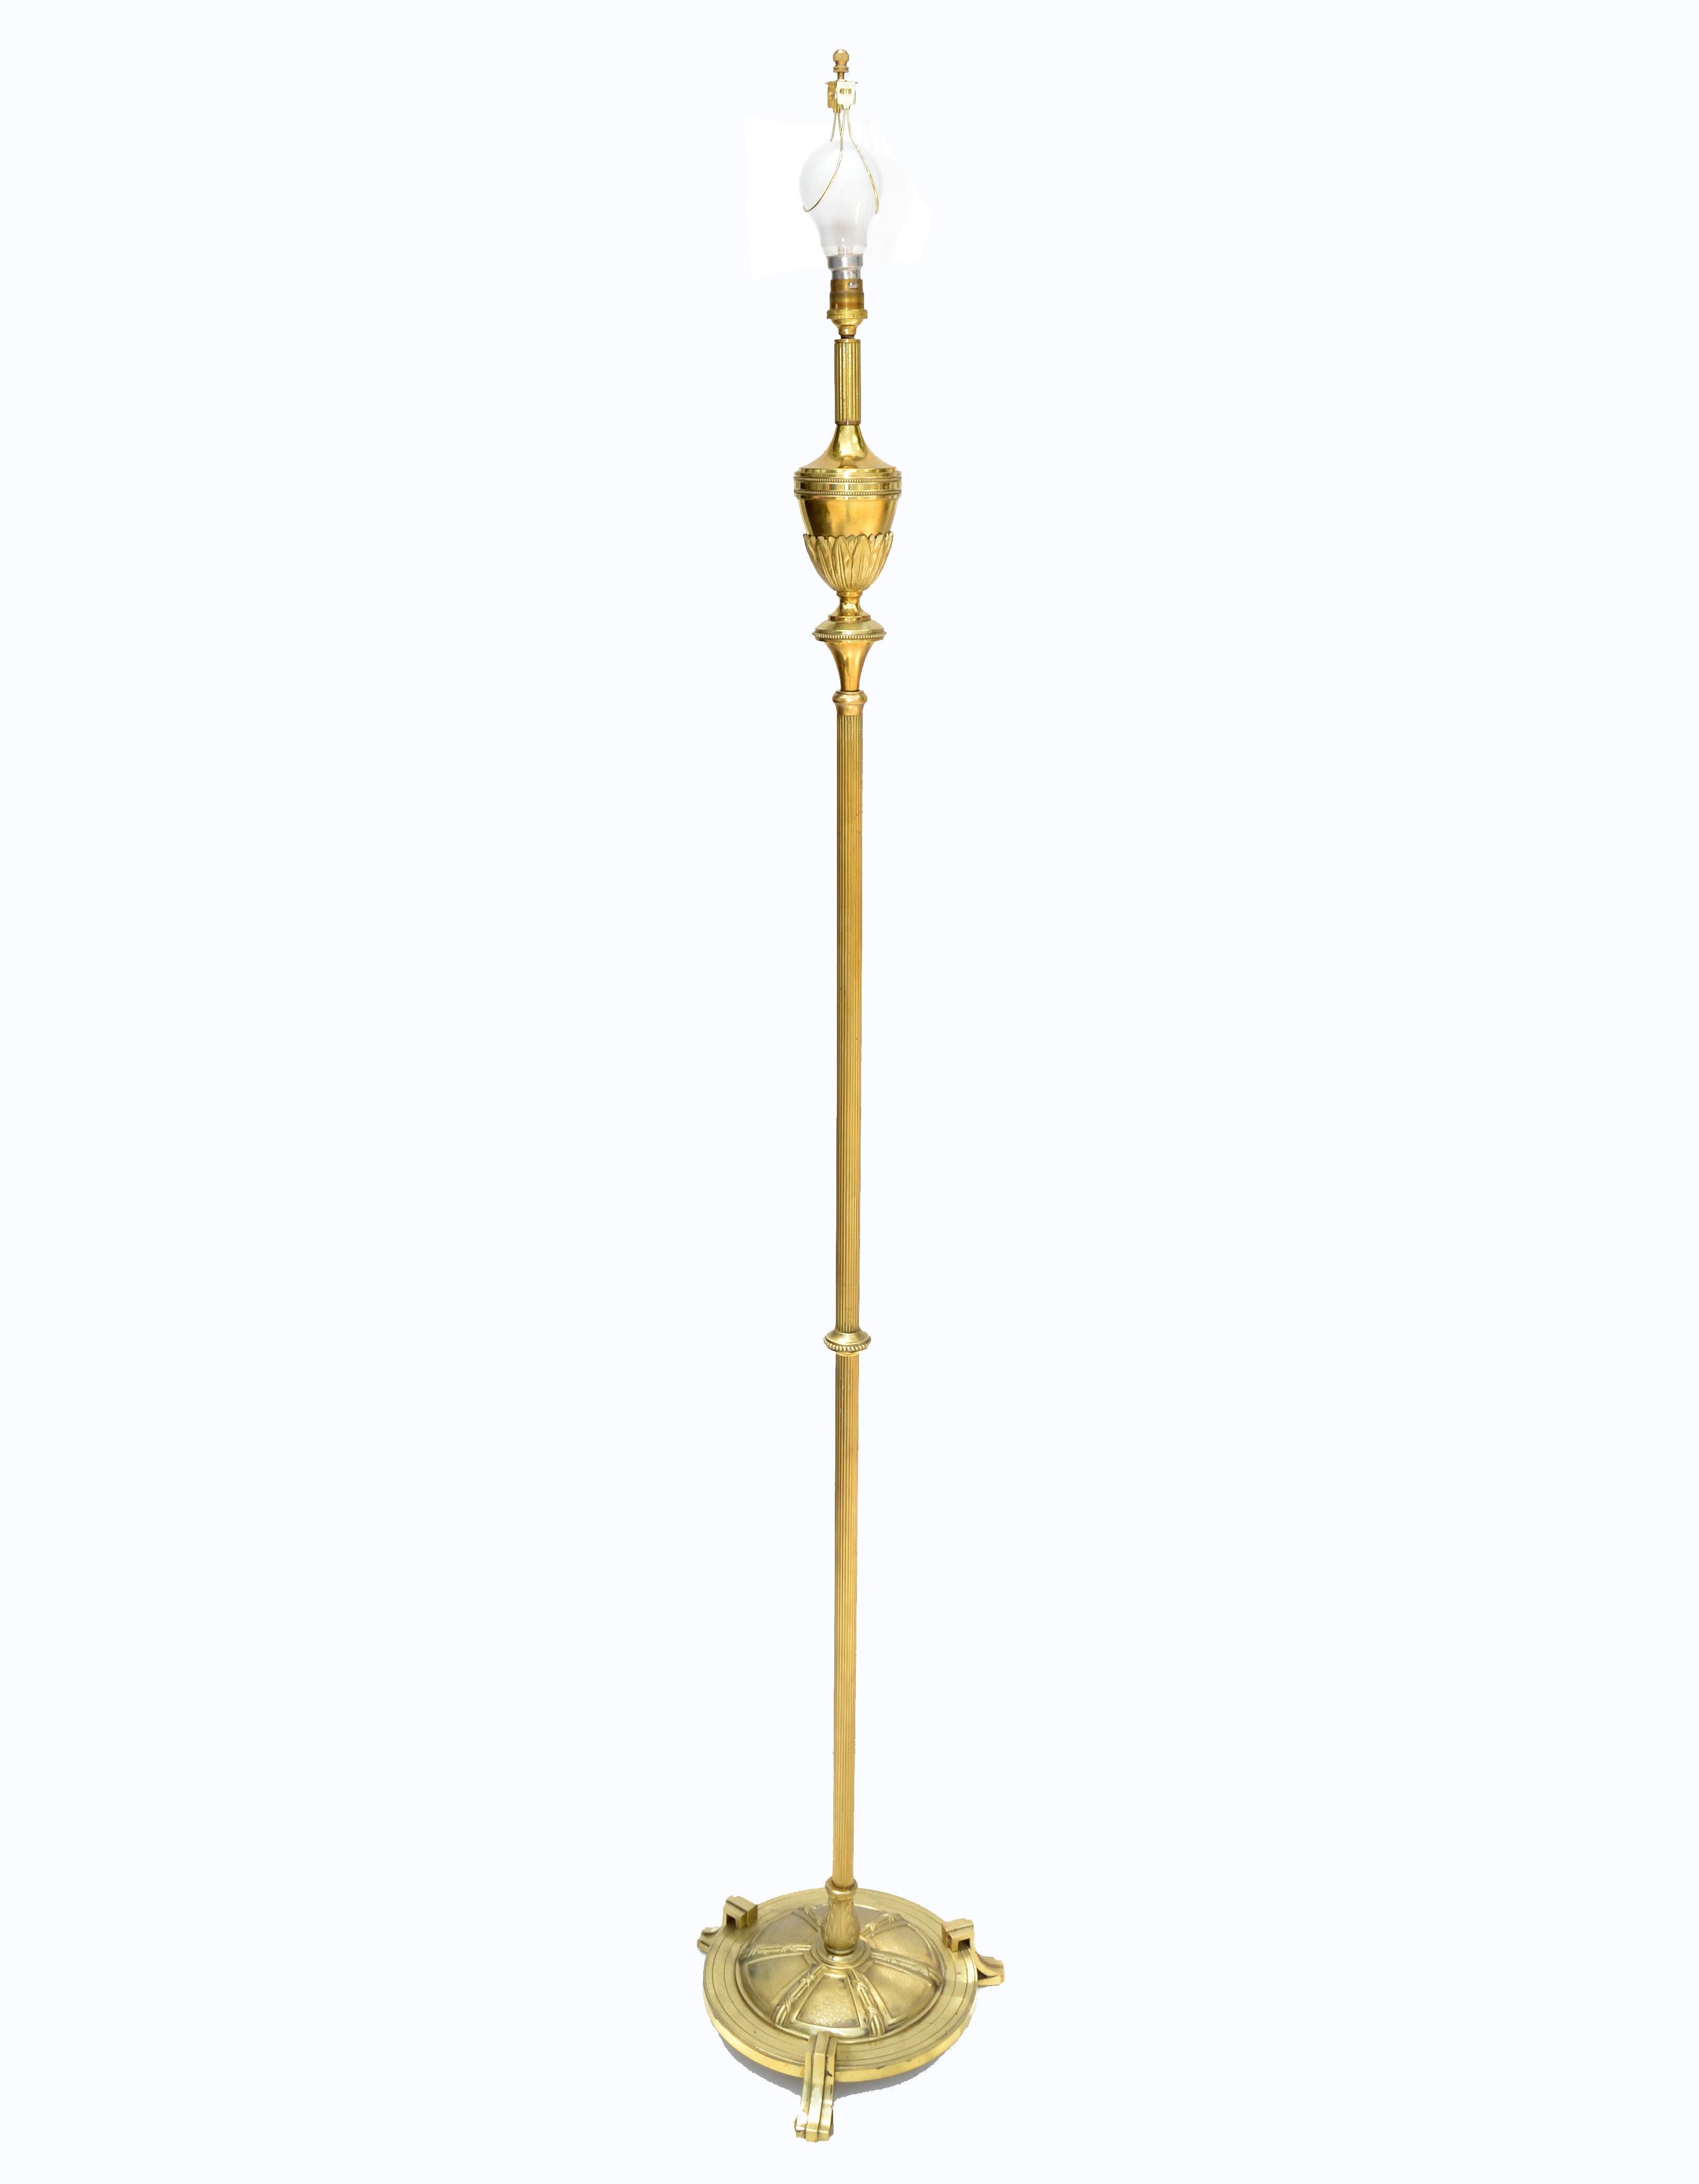 Maison Baguès French neoclassical bronze & brass floor lamp round base from the 1940s.
Solid bronze high quality floor lamp.
Perfect working condition and uses 1 max. 65 watts light bulb.
Adjustable height.